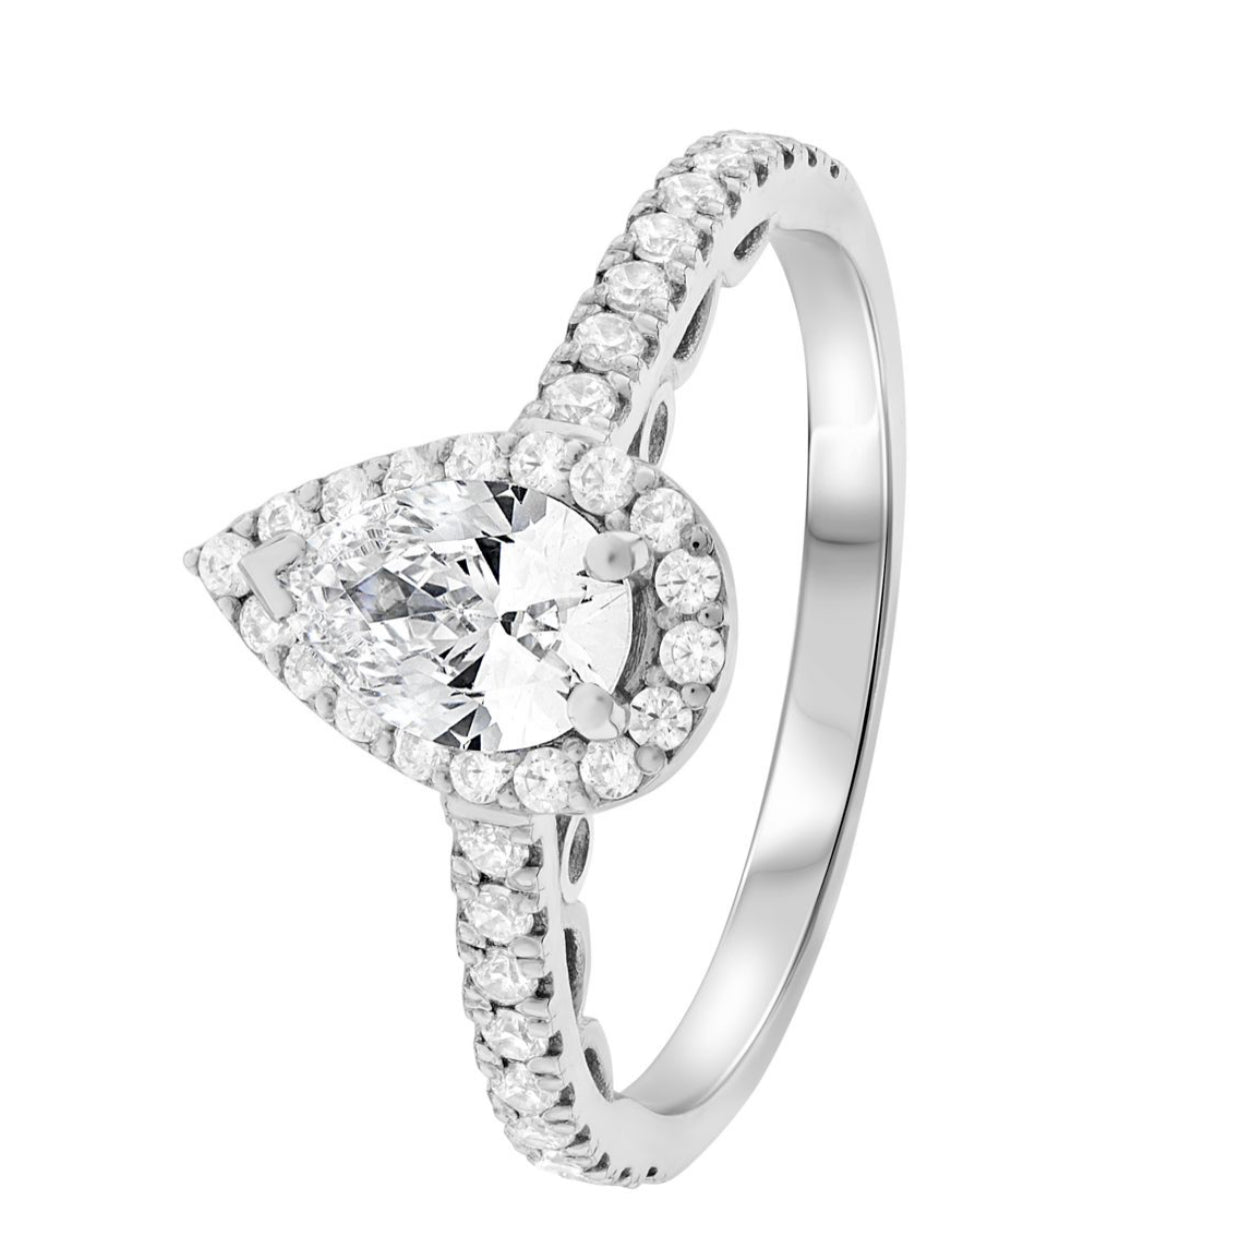 1ct Pear Shaped Diamond with Single Halo Ring